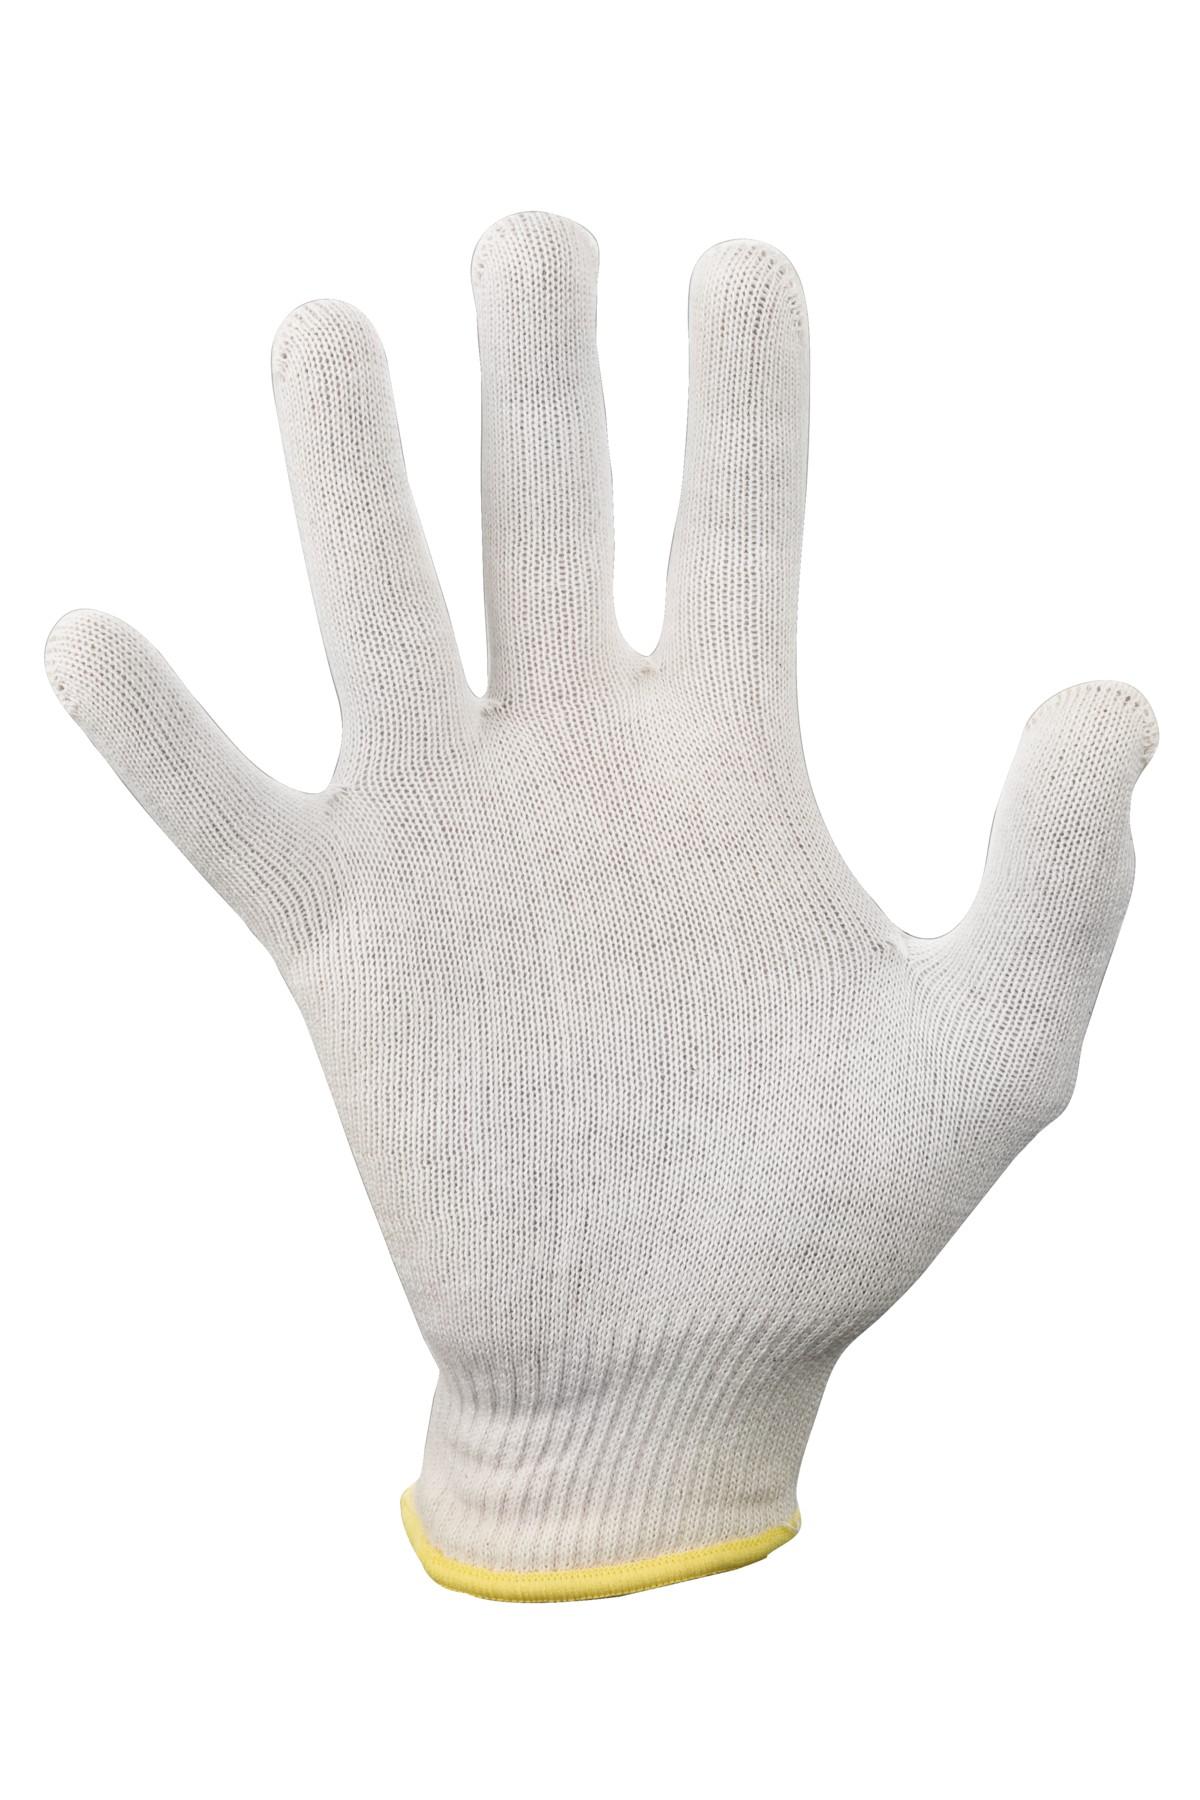 Cotton glove is used as an underglove for insulated gloves